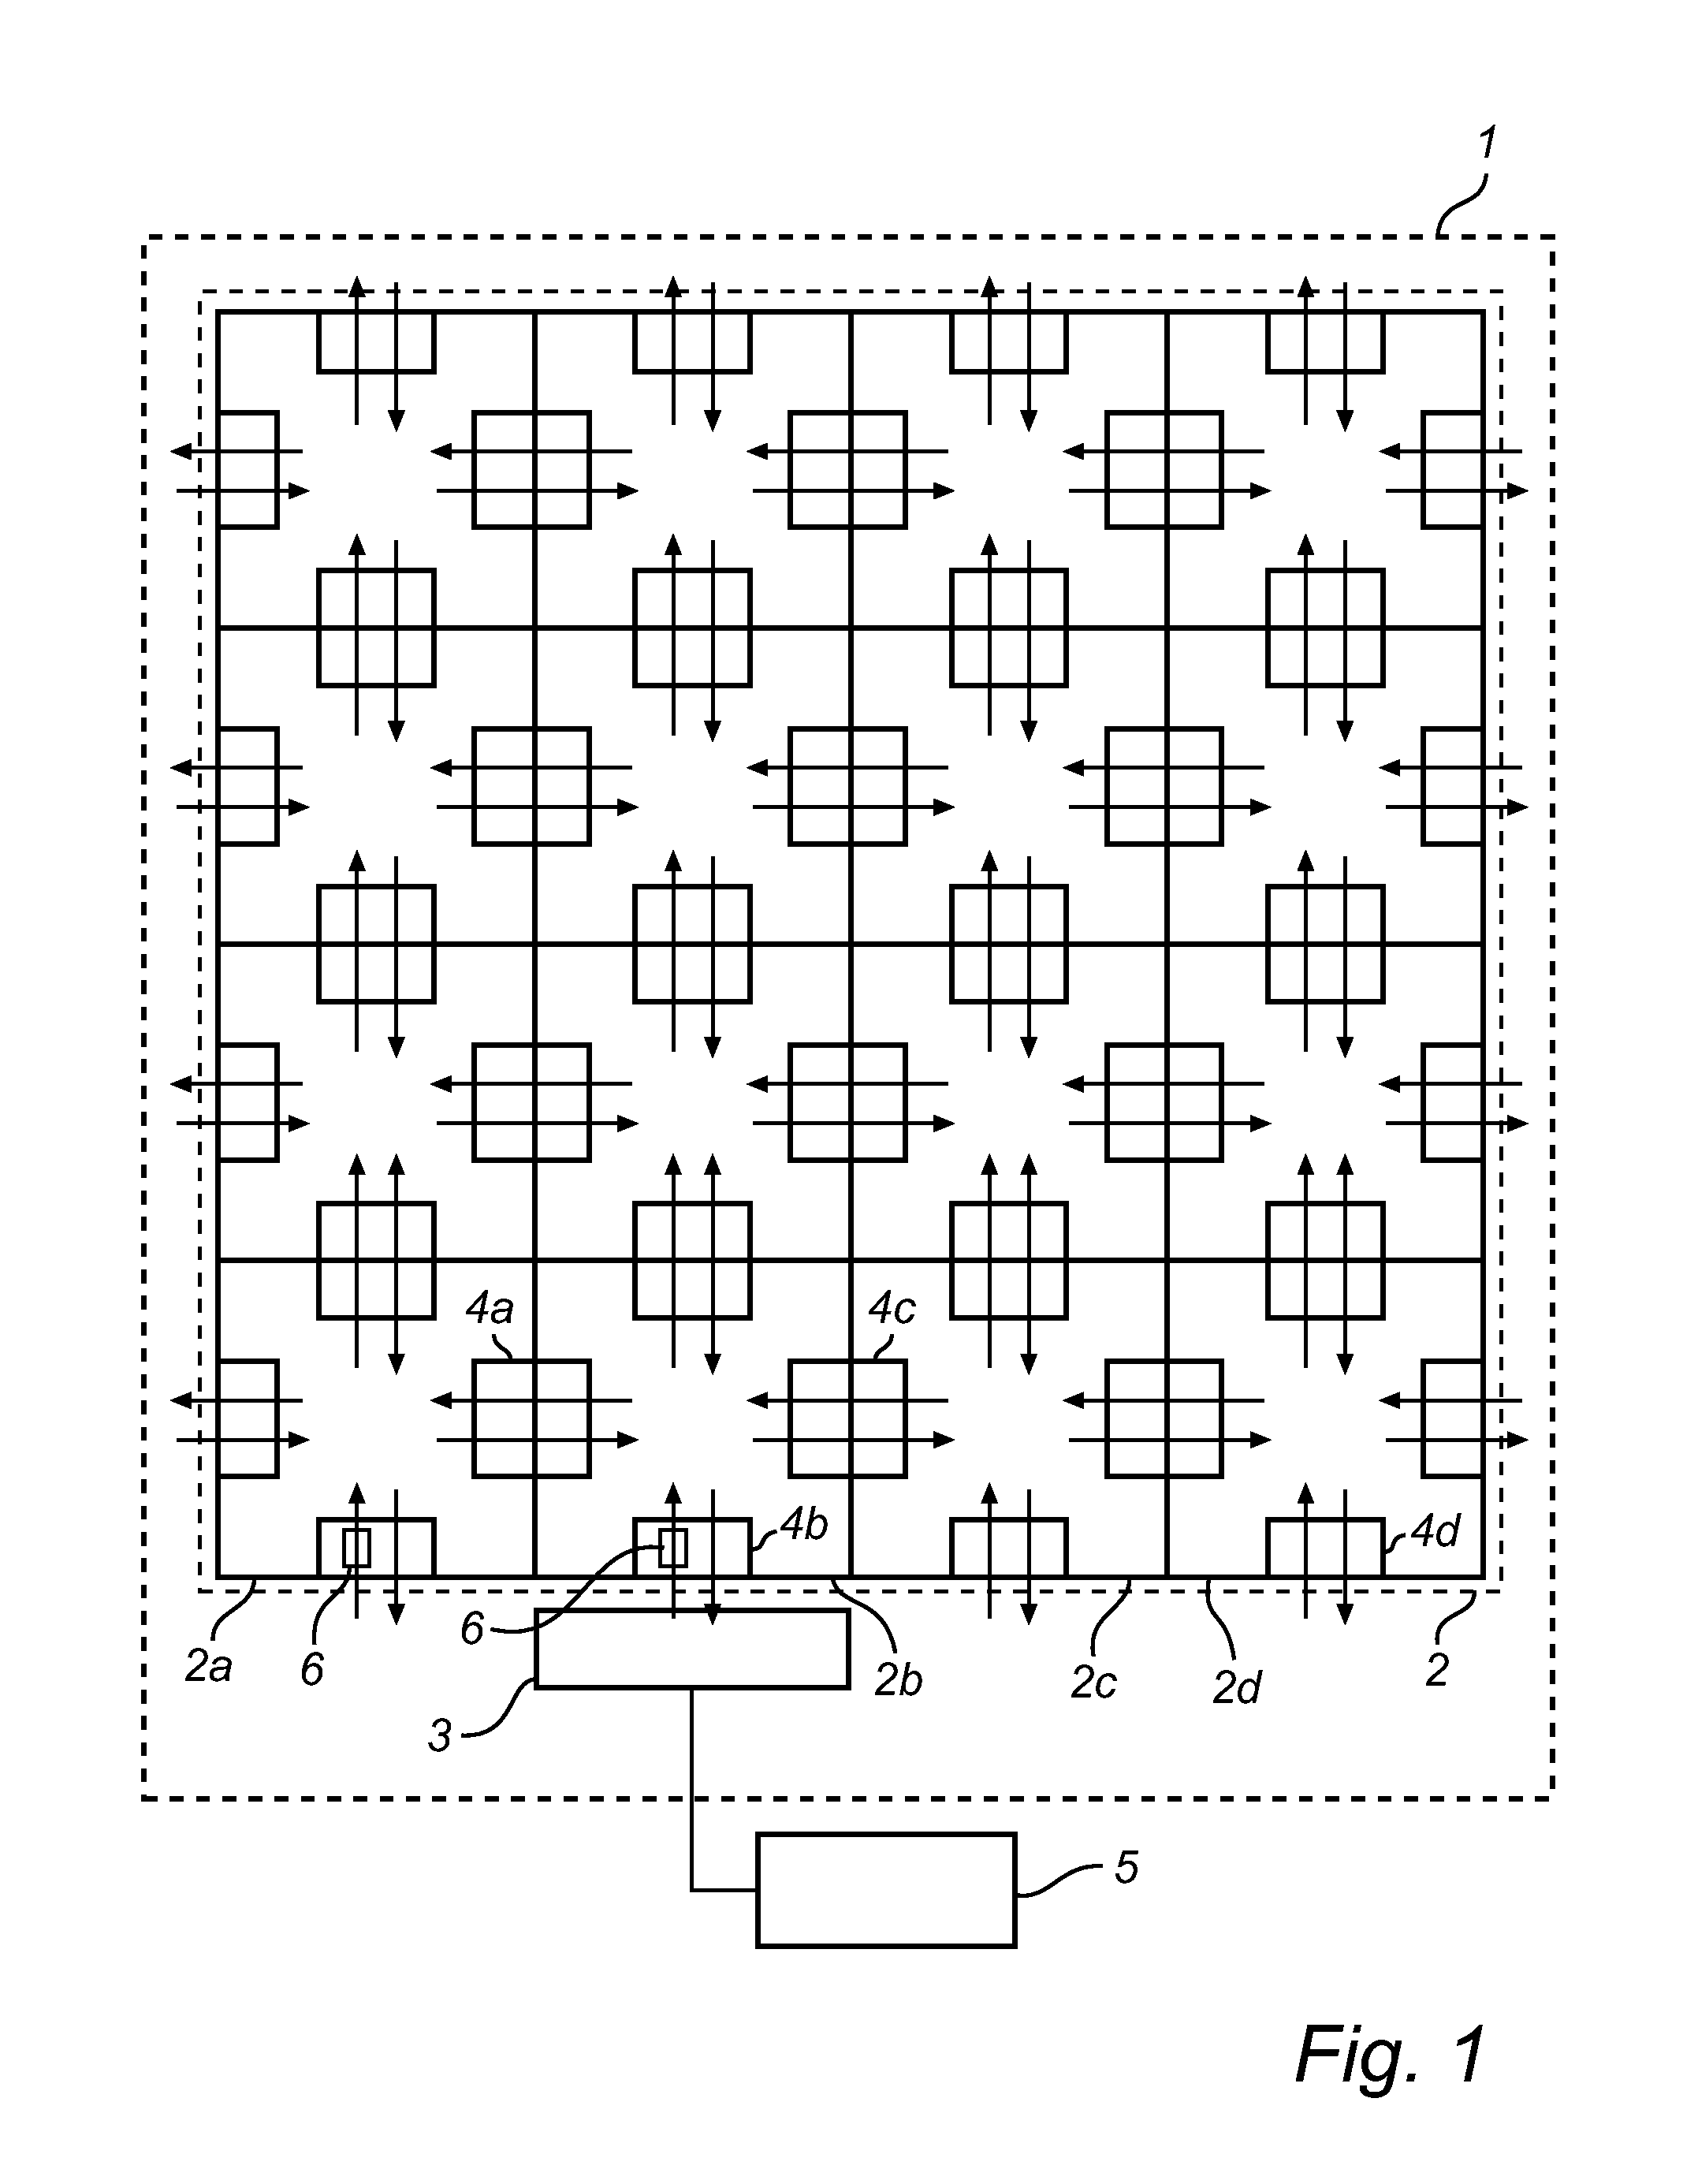 Method for data path creation in a modular lighting system